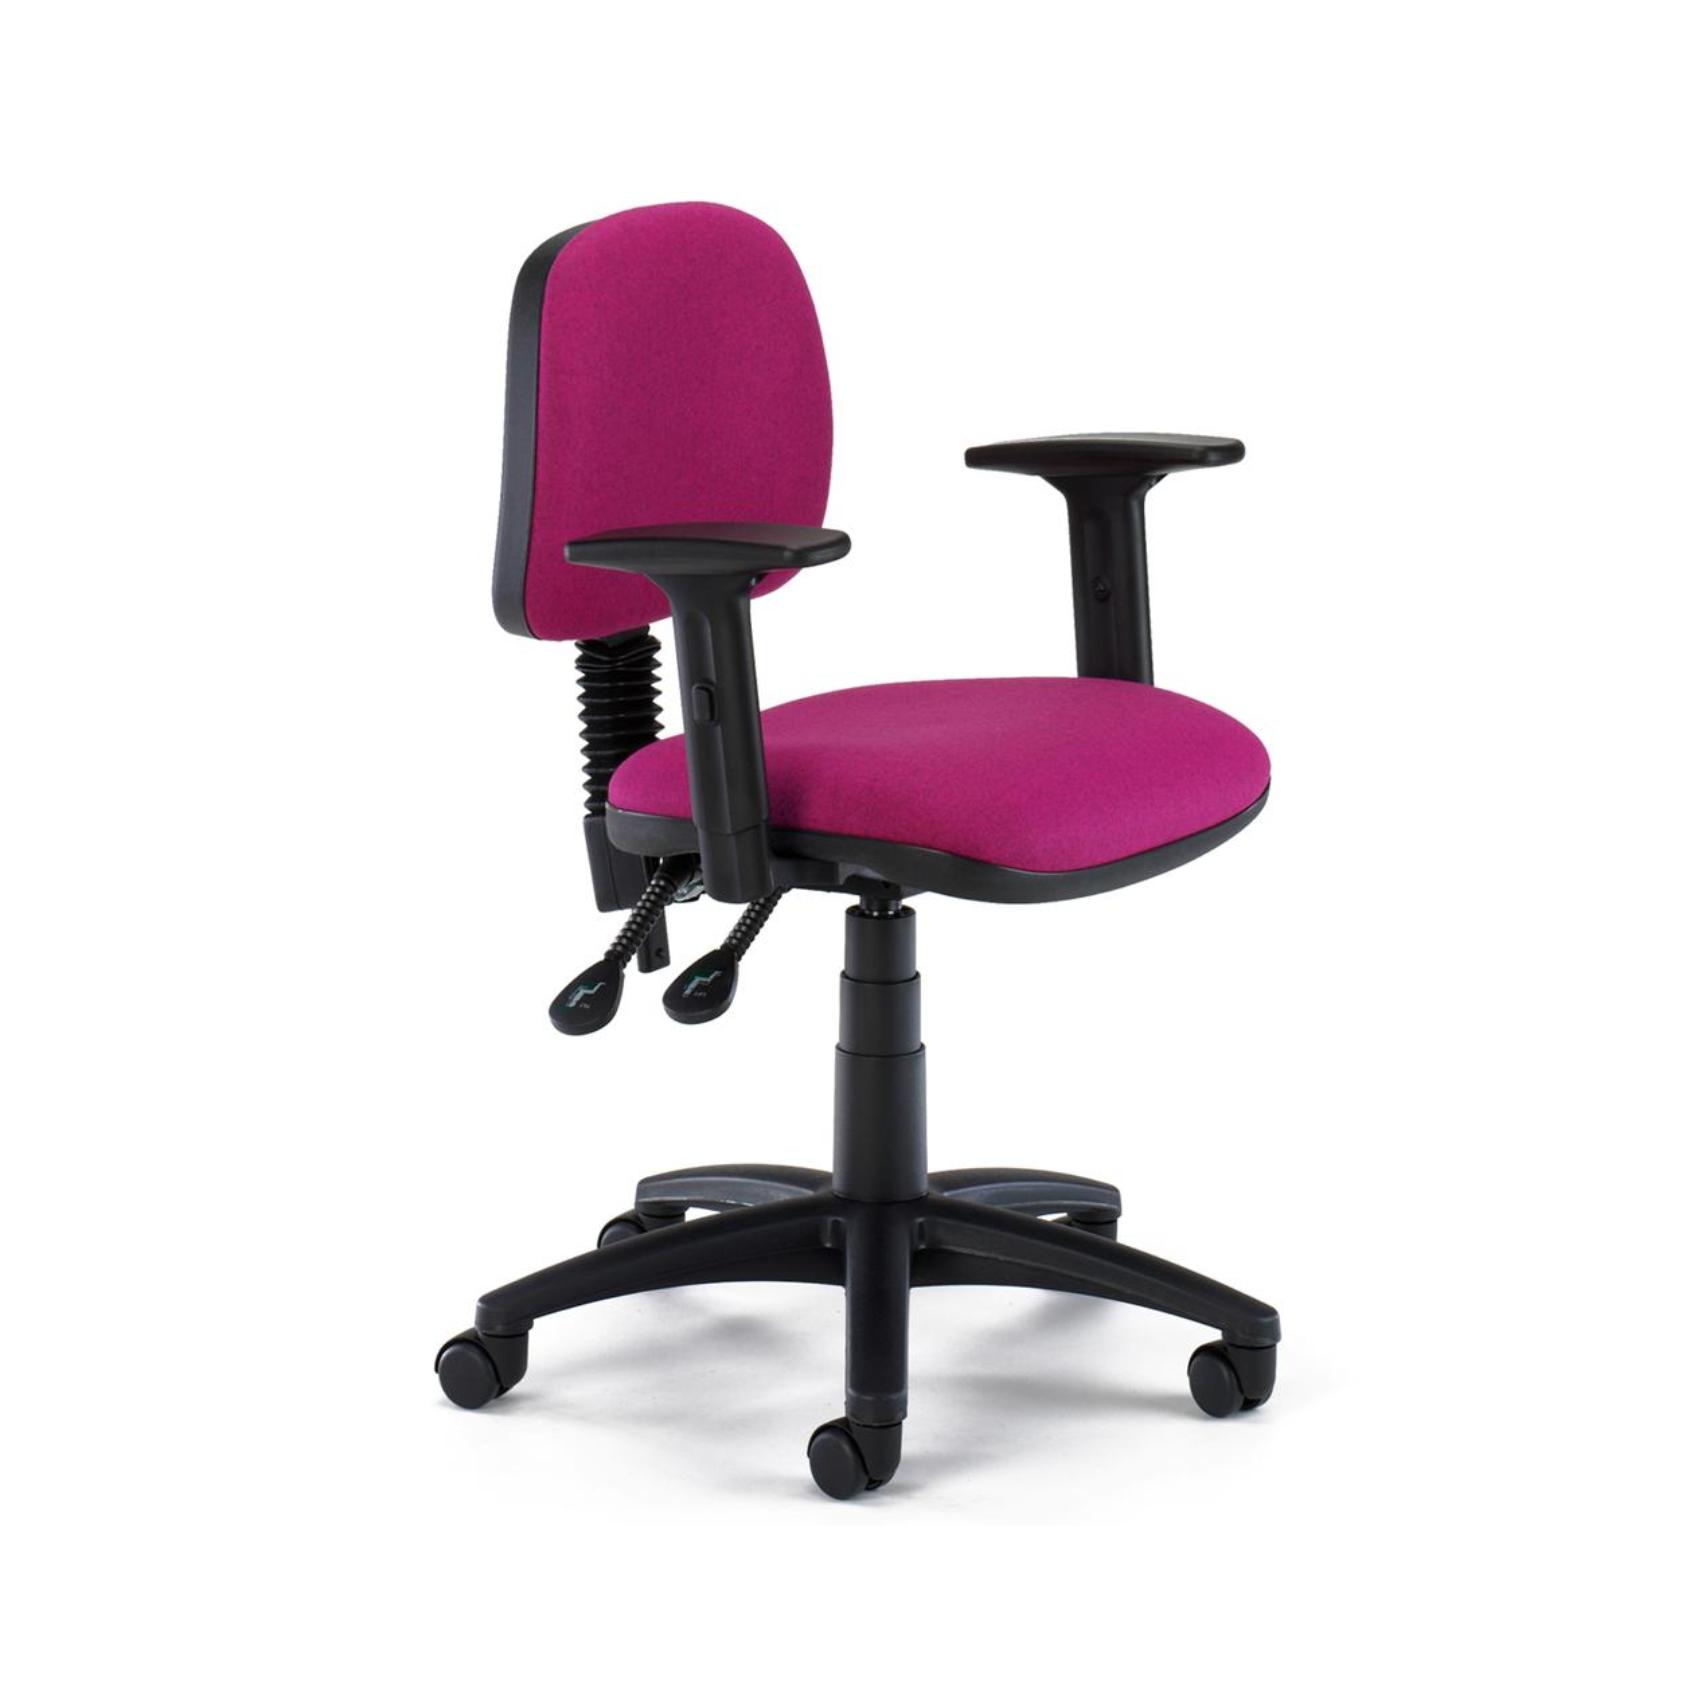 SCT4ADJ - Operators Chair with Adjustable Arms